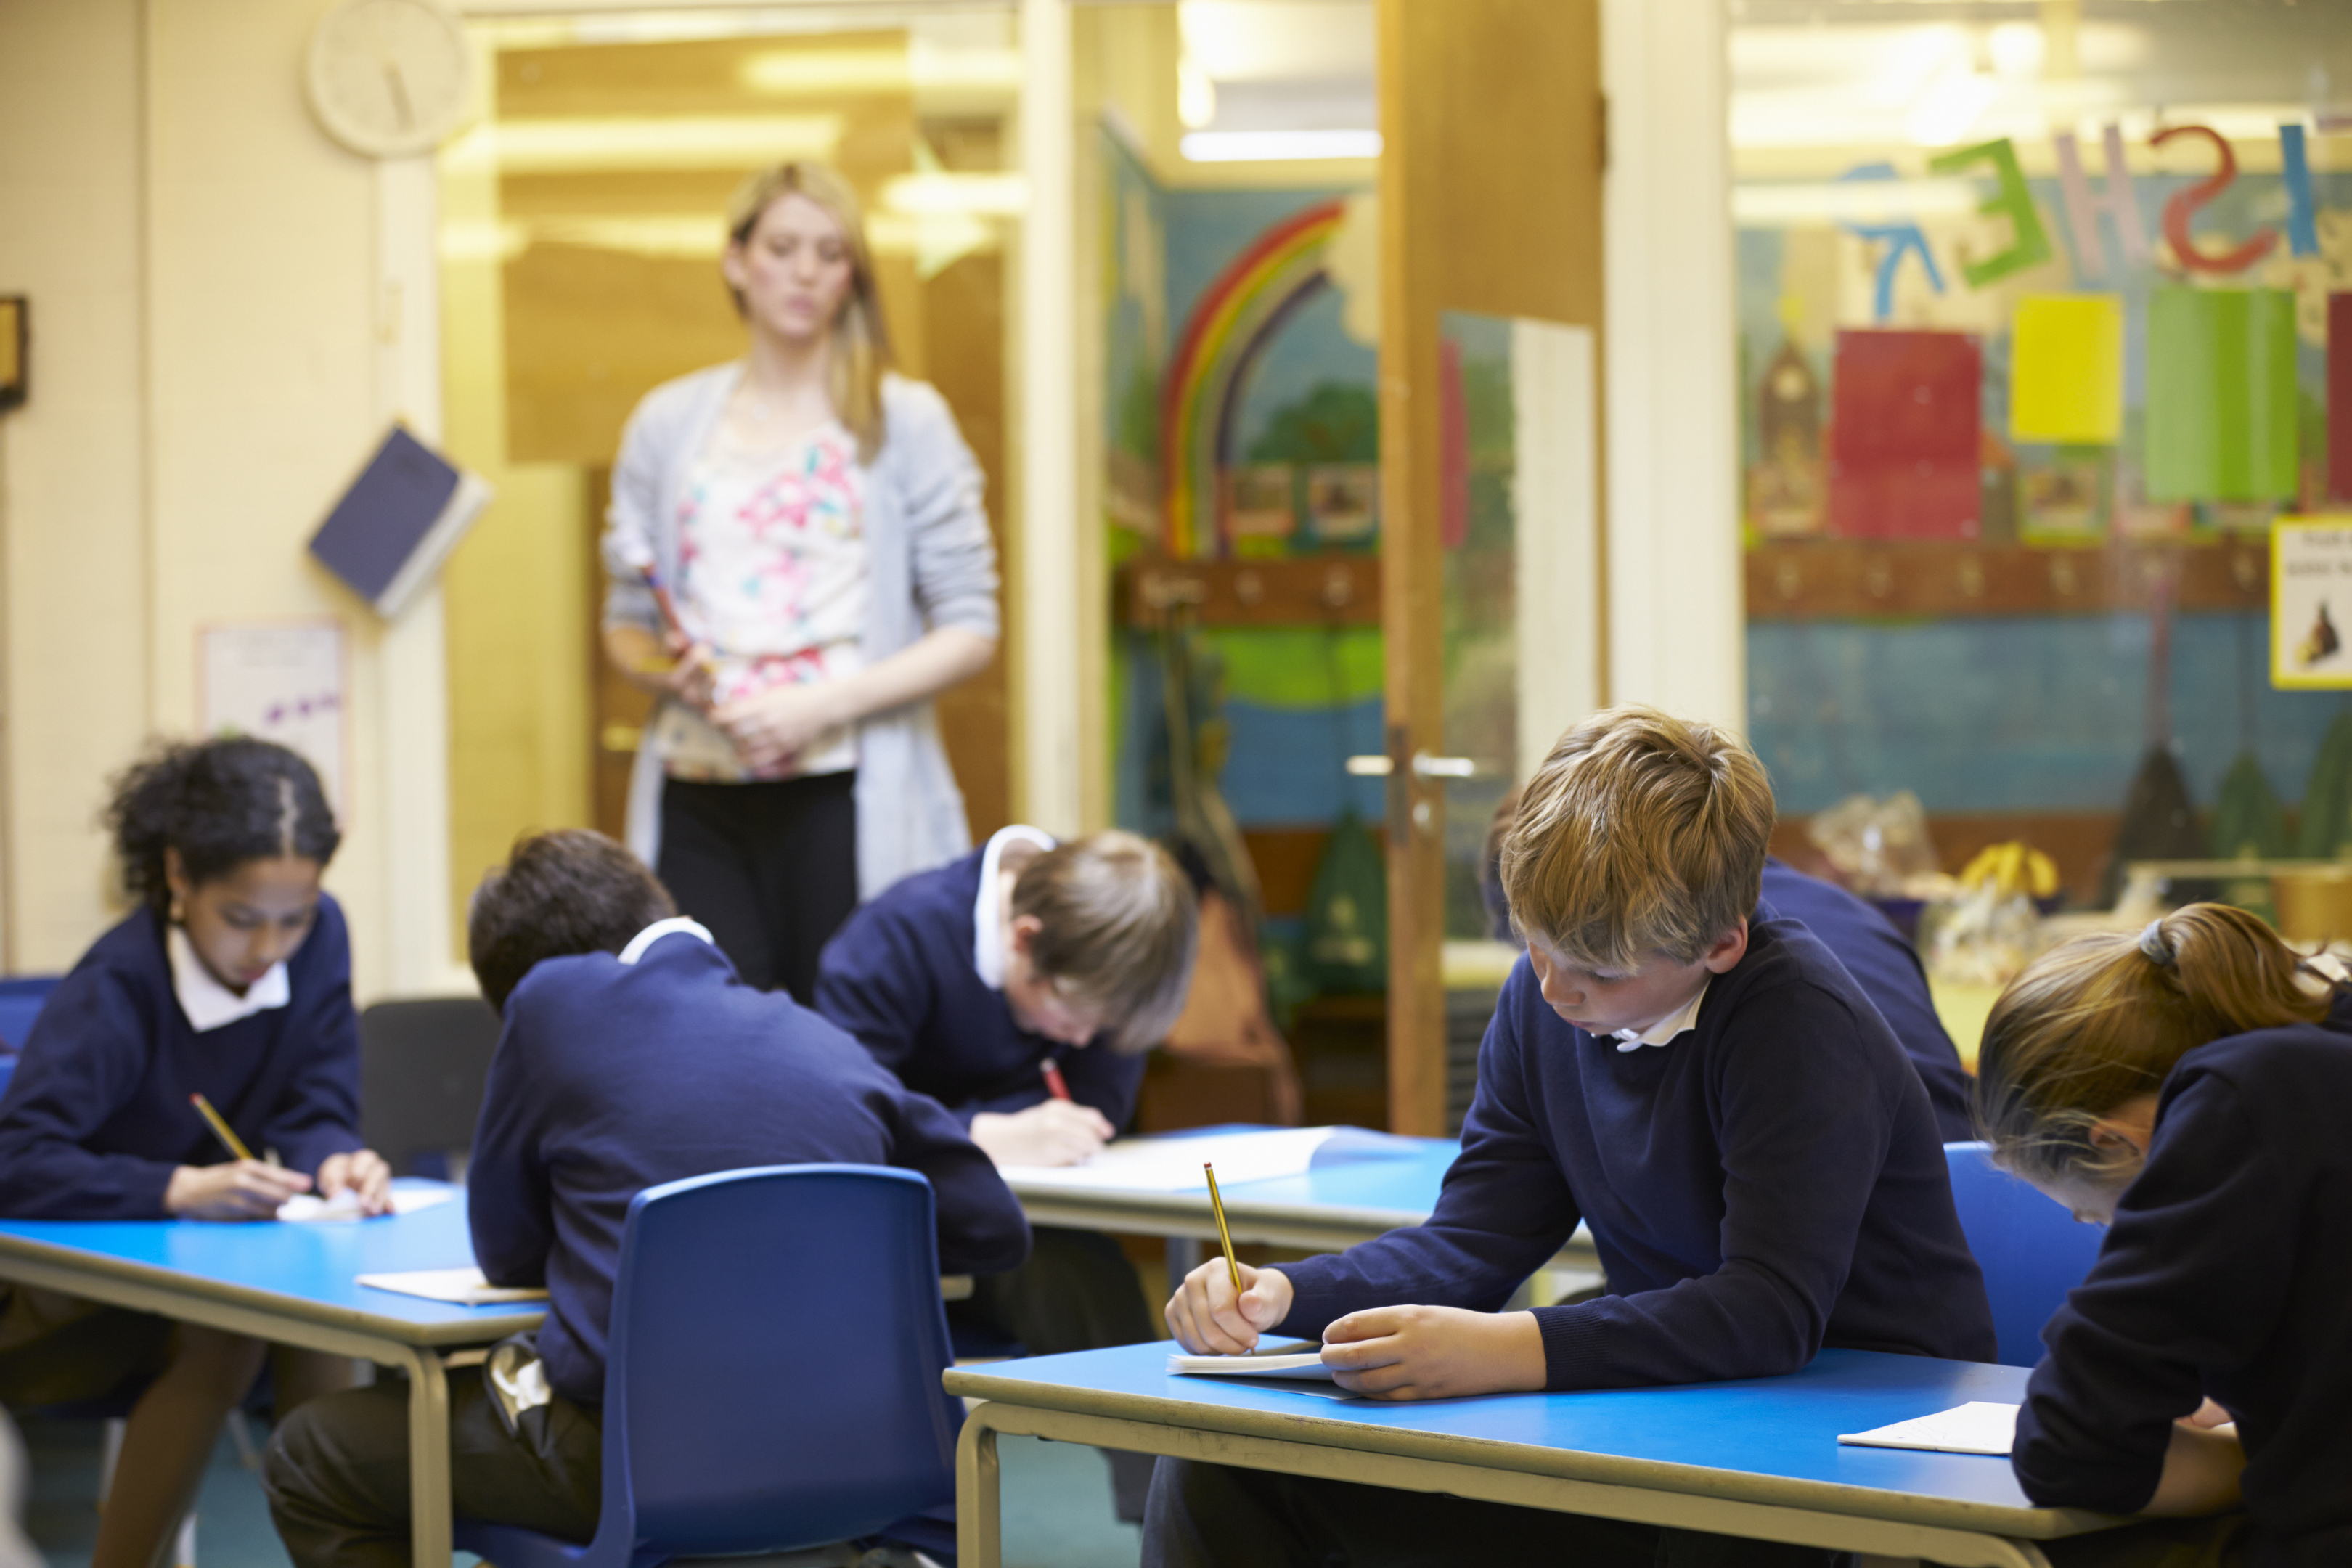 Labour has blamed "supersized" classes in Scotland's primary schools for the attainment gap between richer and poorer pupils (Getty Images/iStock)